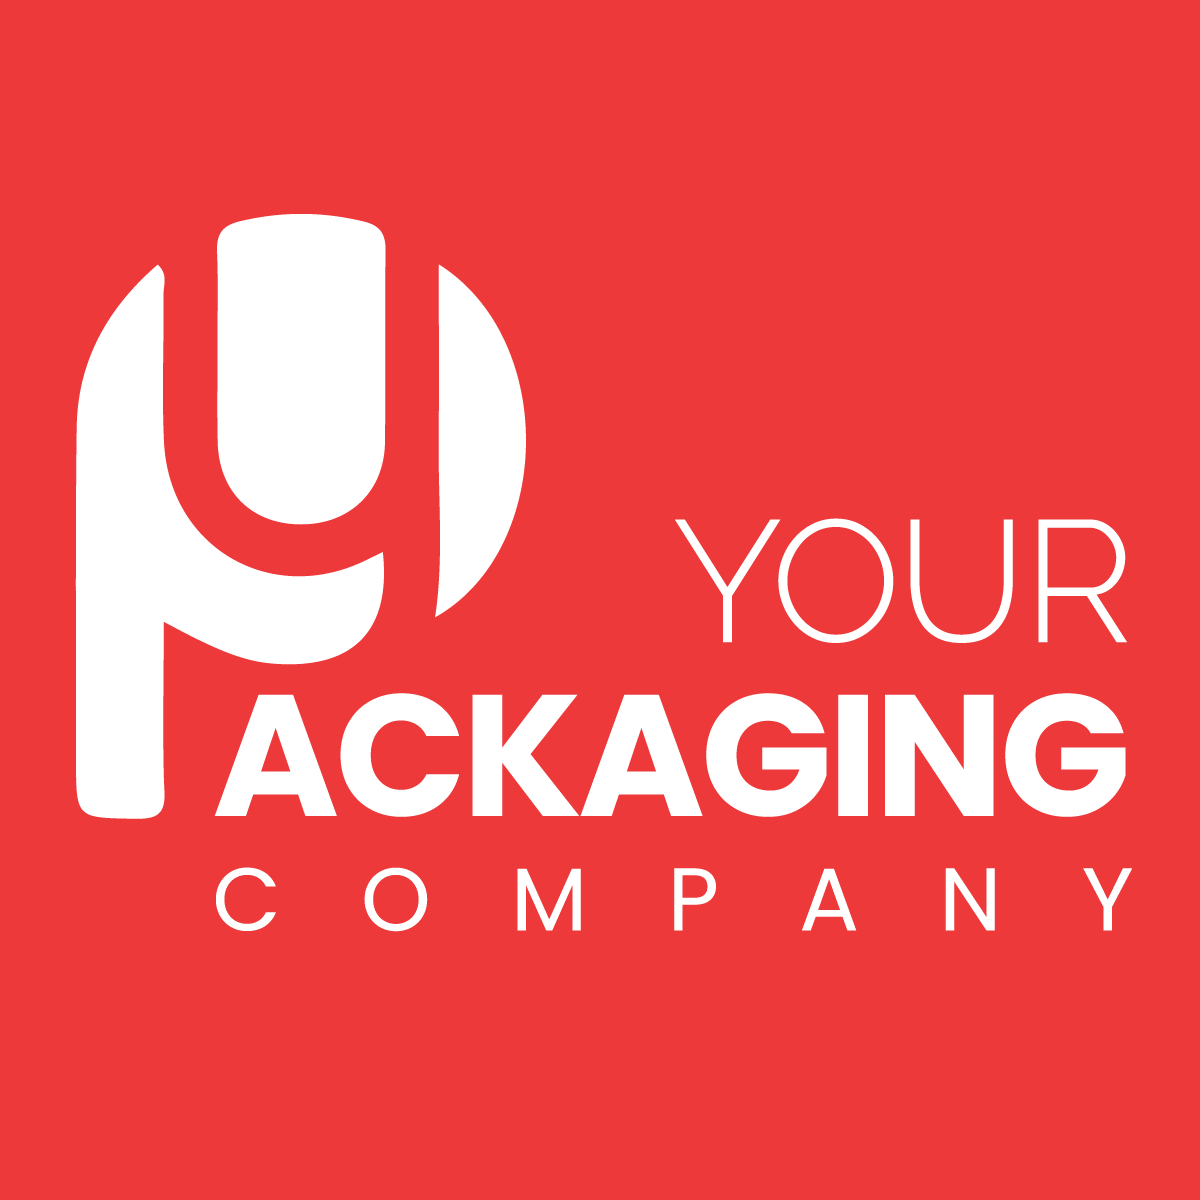 Company logo of Your Packaging Company